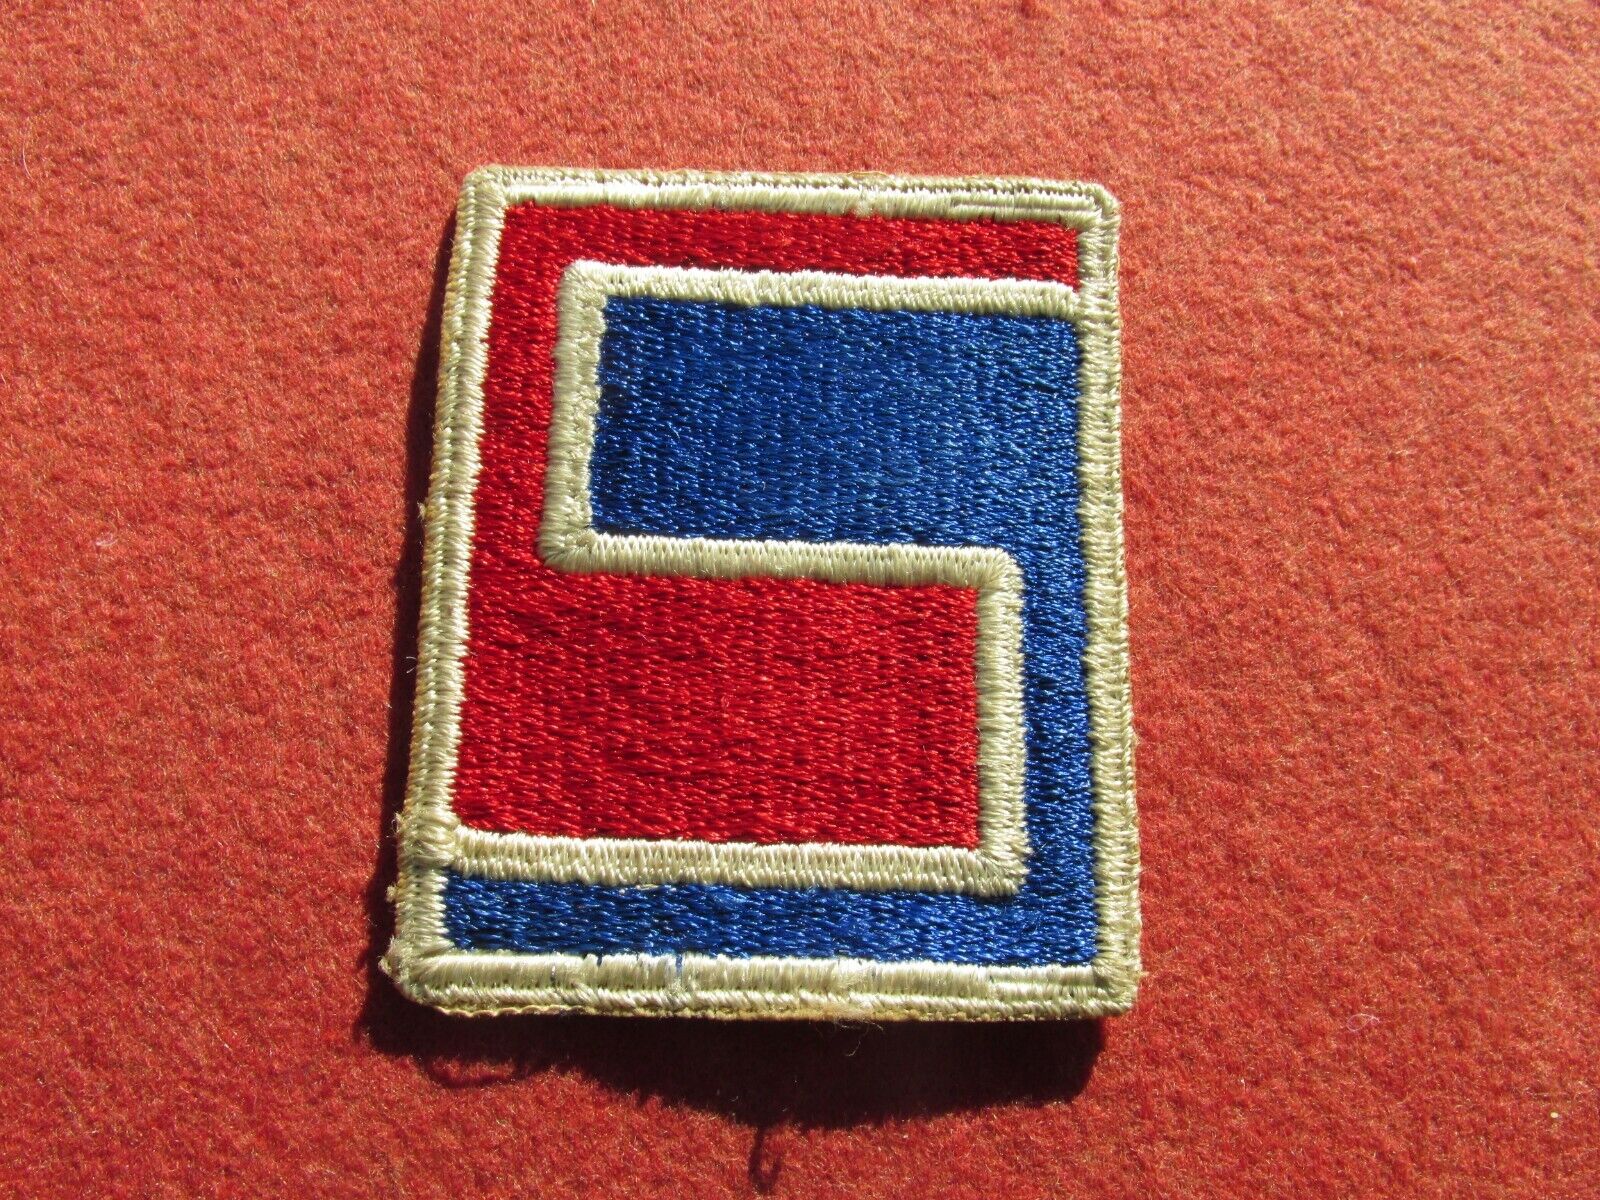 WW 2 US Army 69th Infantry Division Patch Insignia Fighting Sixty Ninth division